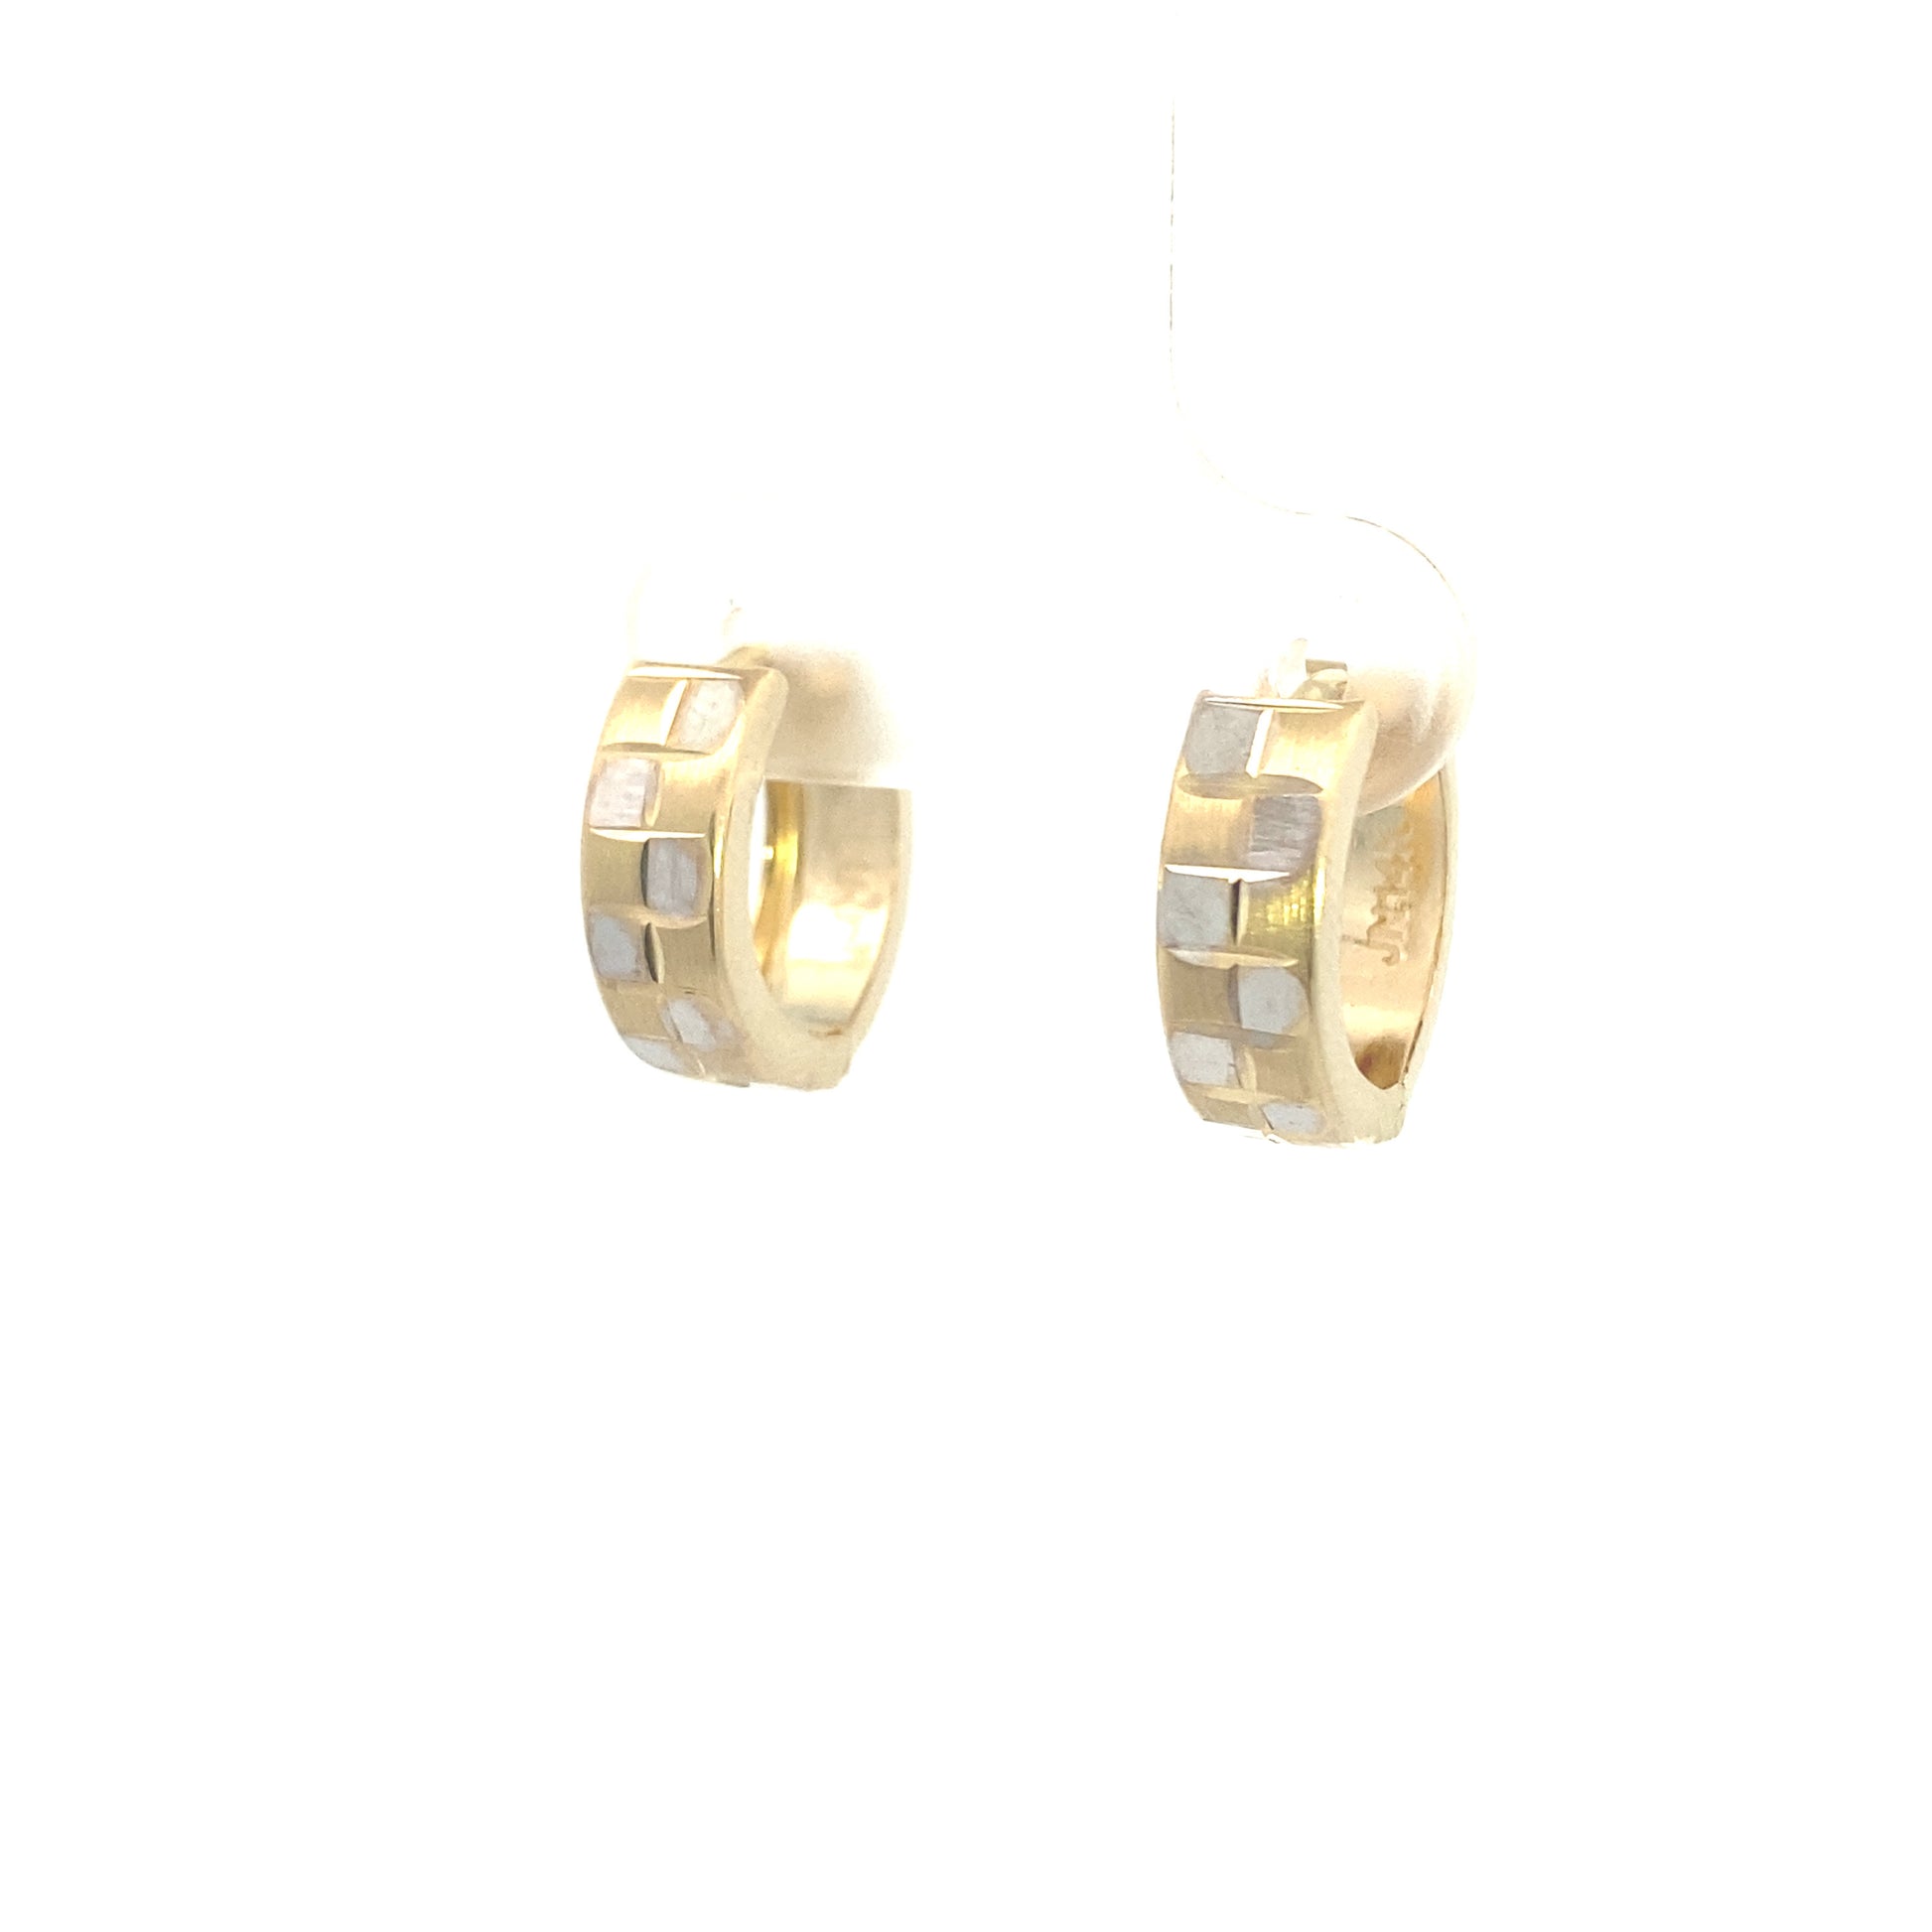 14K Gold 2t Hoops Earrings | Luby Gold Collection | Luby 